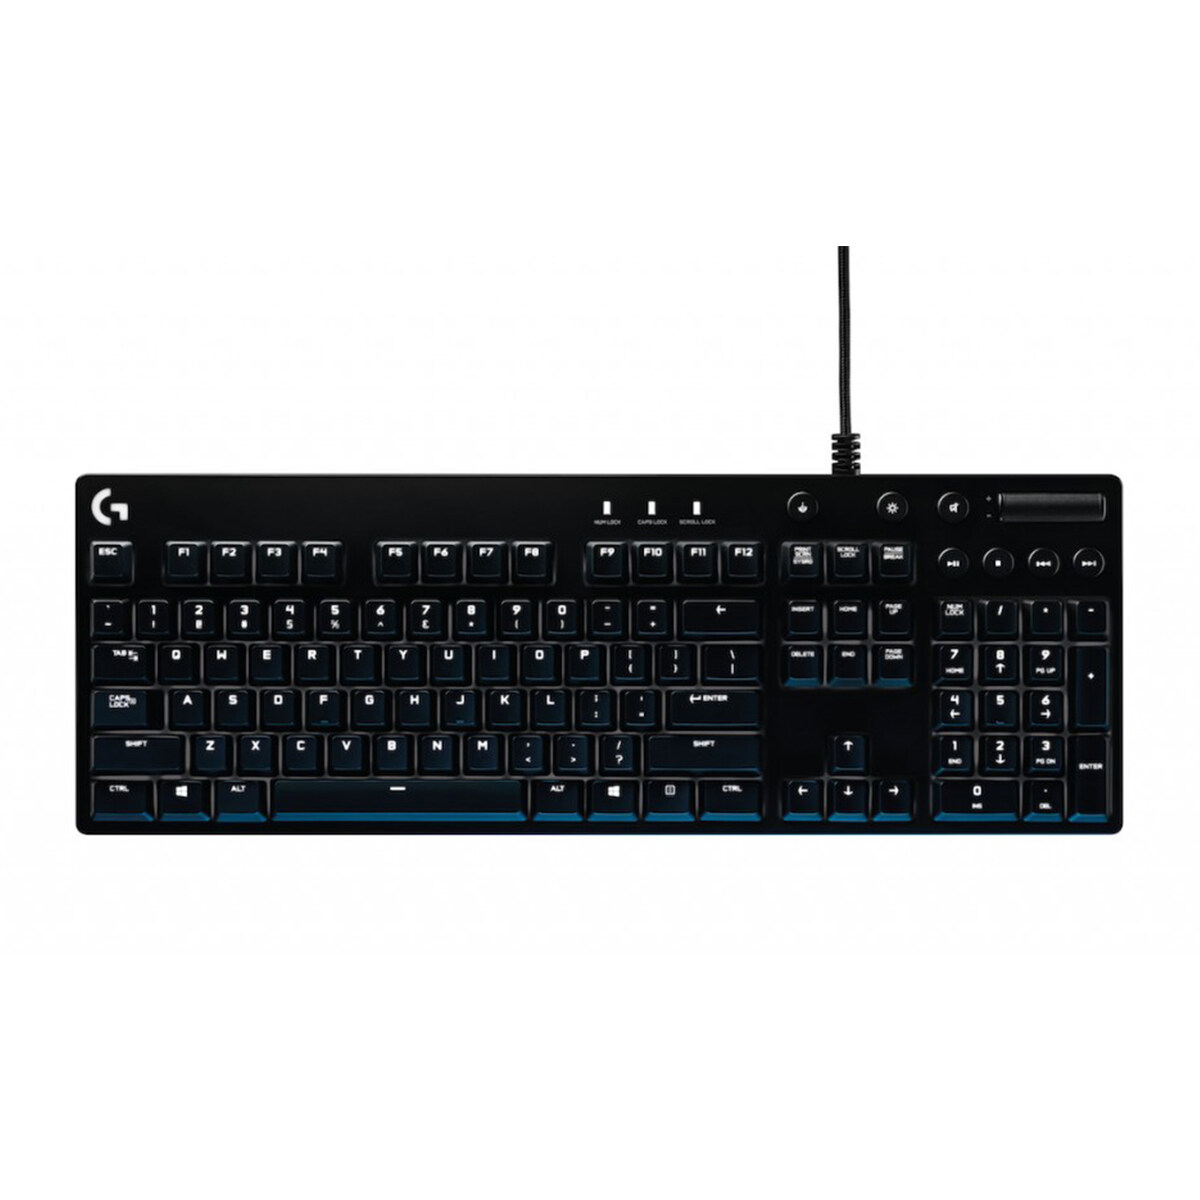 Logitech G610 Orion Blue Mechanical Gaming Keyboard with Cherry MX Blue Switches Media Control Logitech Software Support